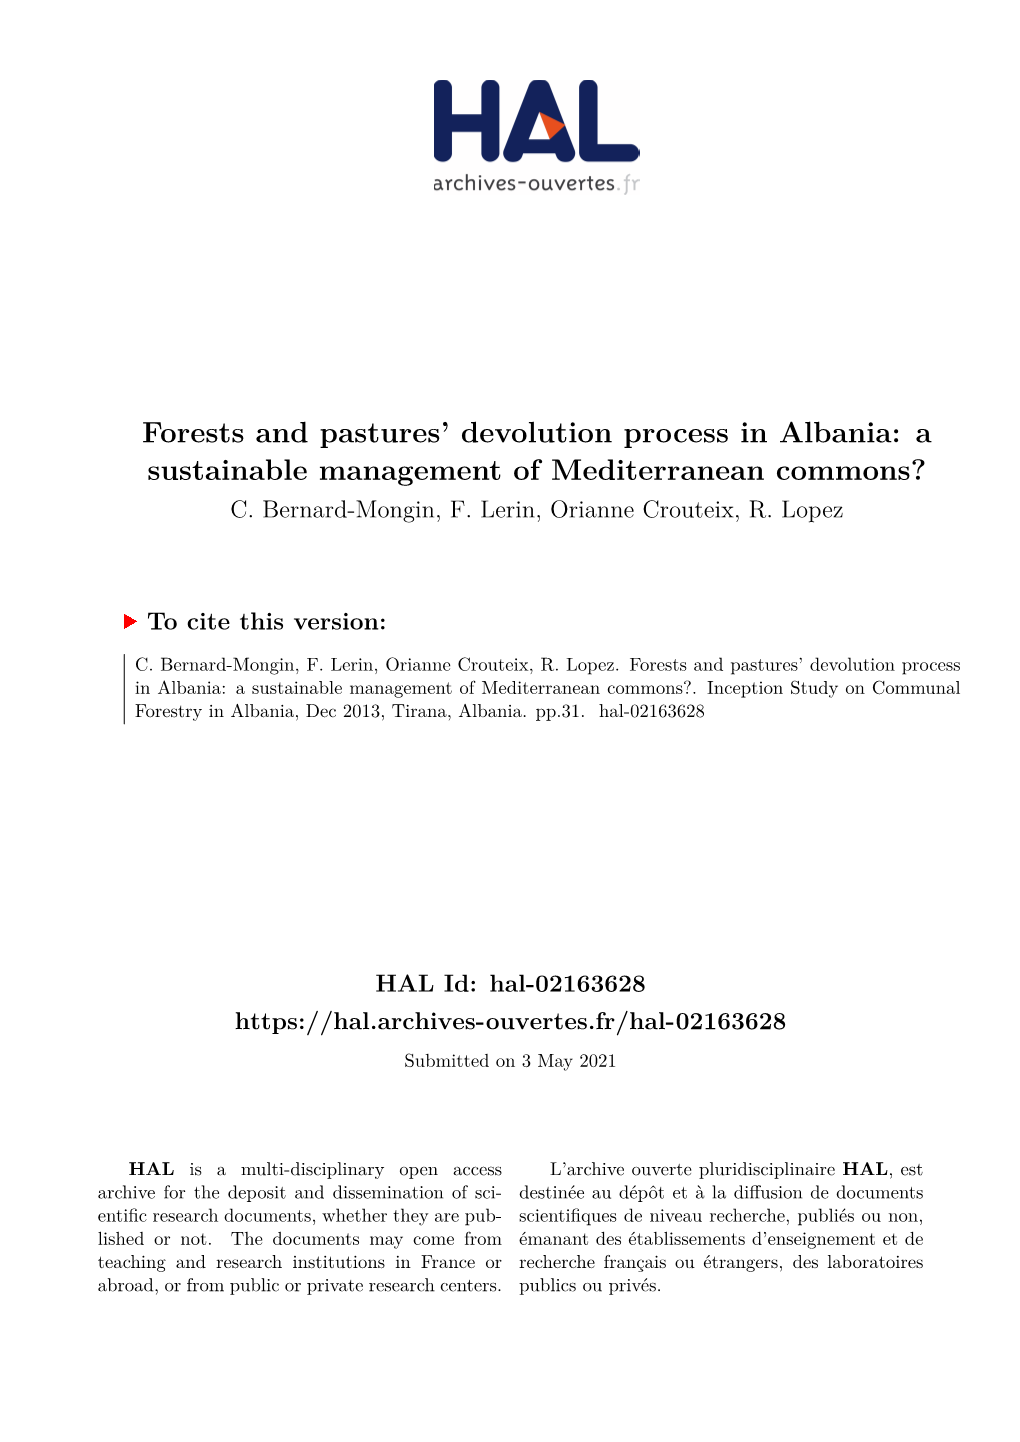 Forests and Pastures' Devolution Process in Albania: a Sustainable